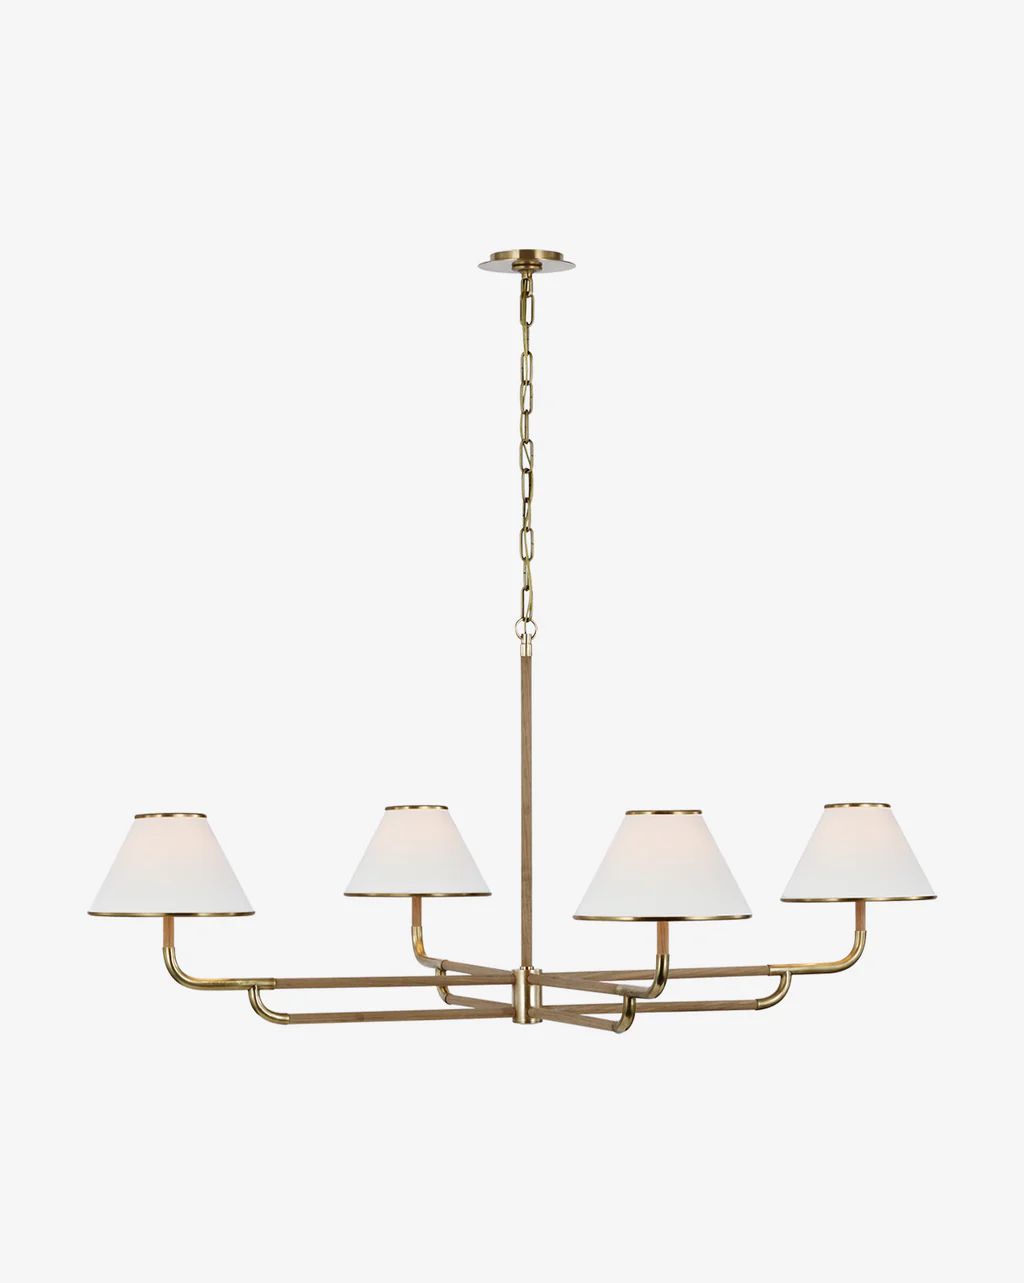 Rigby Grande Chandelier | McGee & Co.